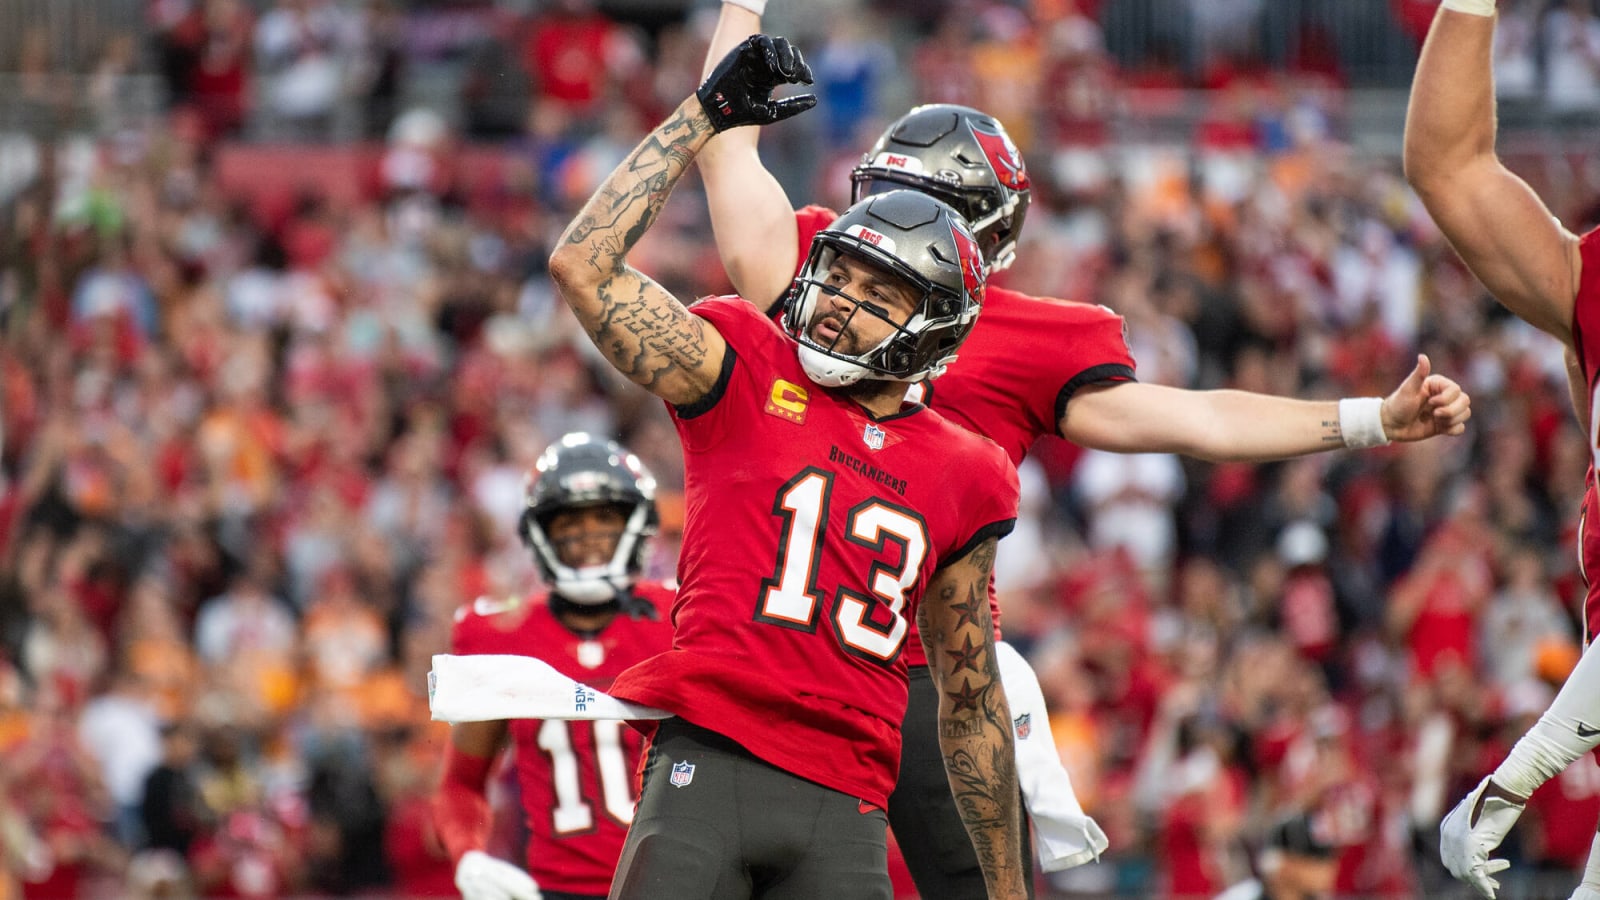 Top Free Agency Landing Spots For Mike Evans